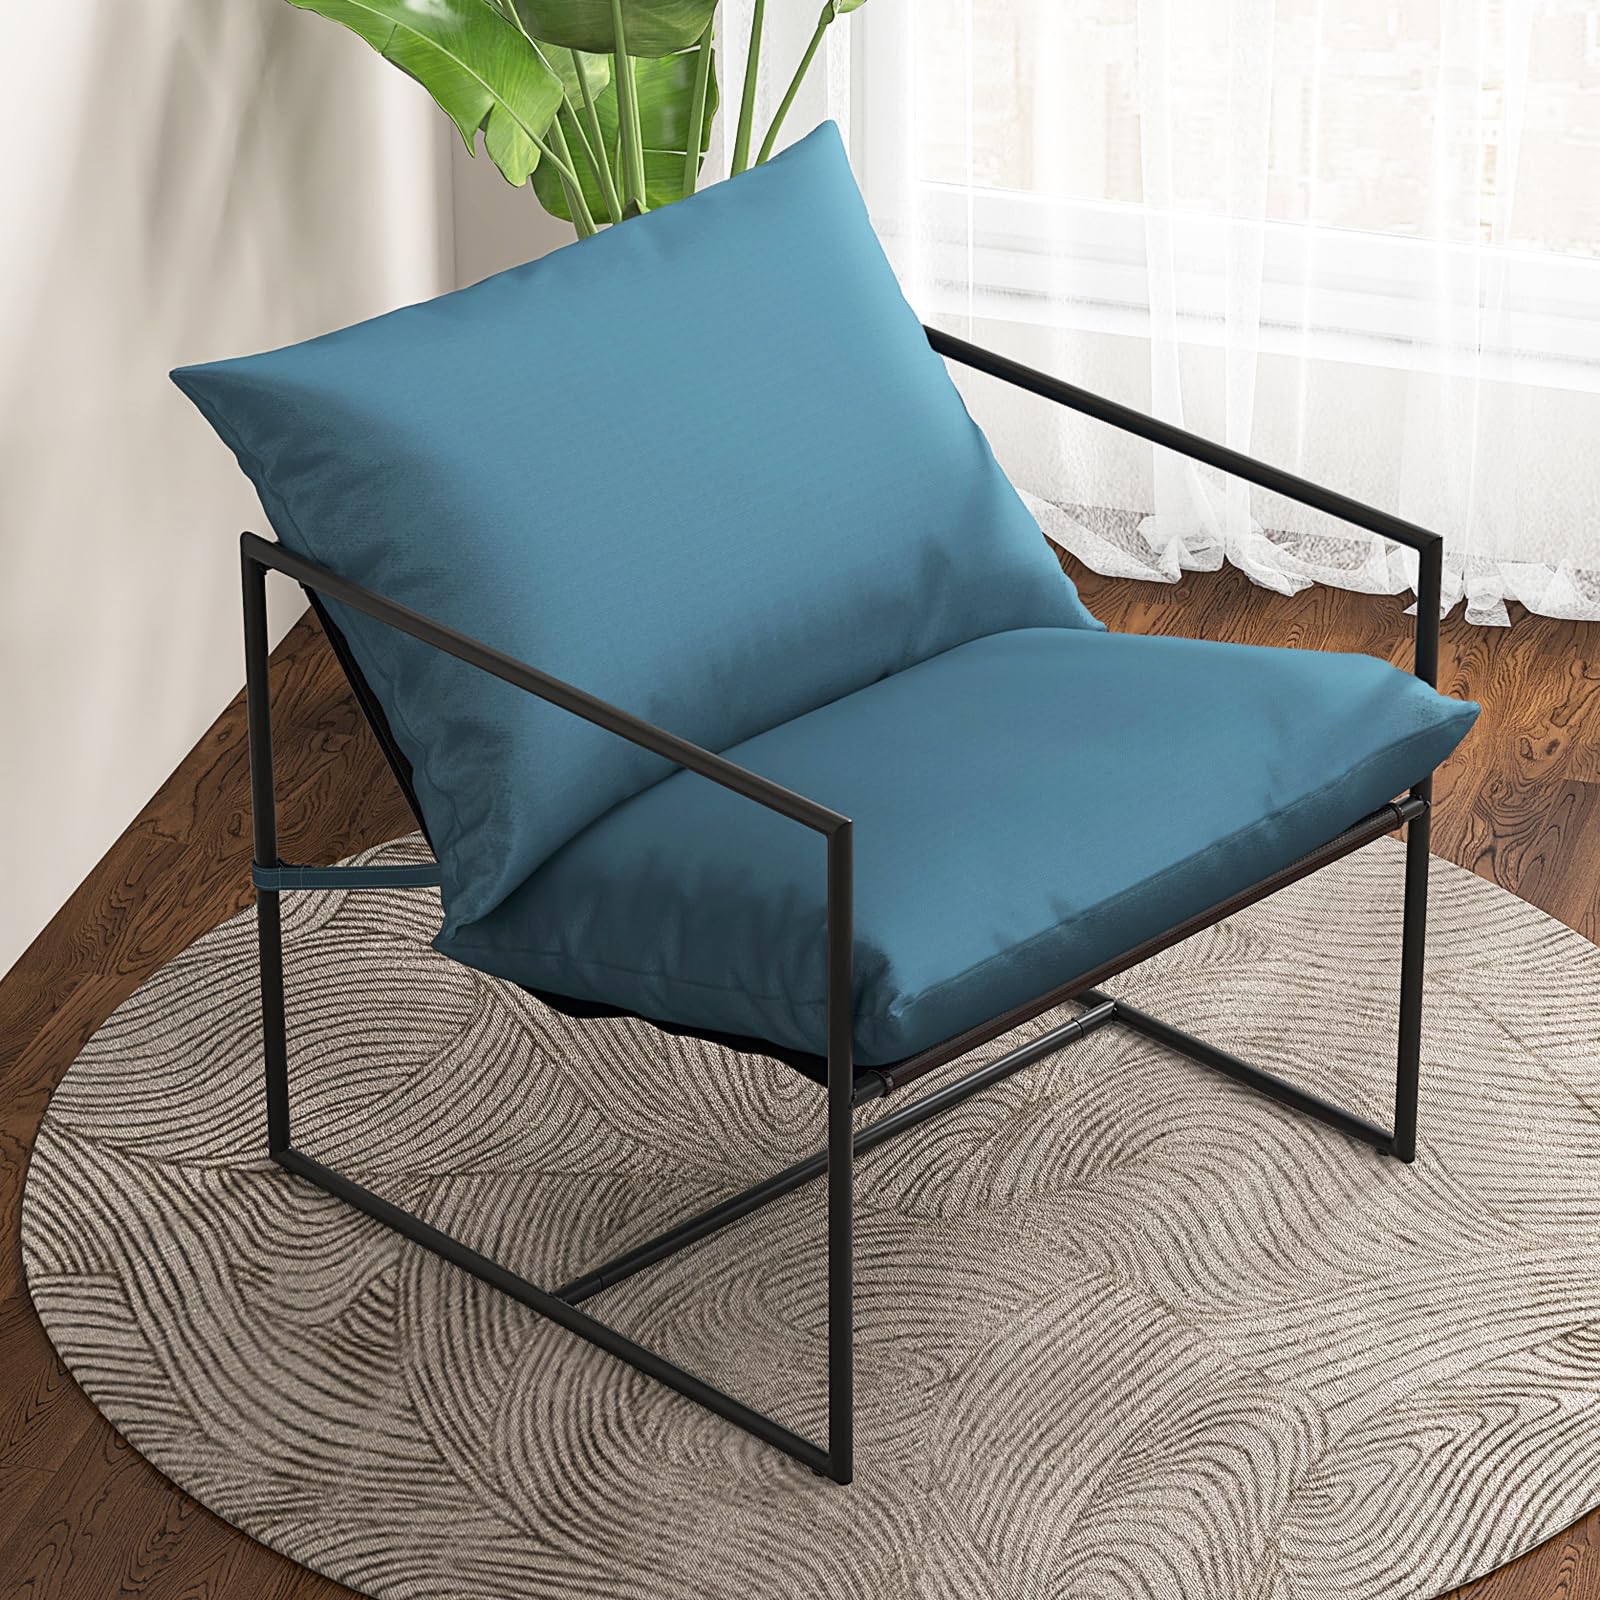 Giantex Accent Chairs for Living Room - Metal Framed Armchair with Removable Sponge Cushion, Sling Accent Chair Set of 2